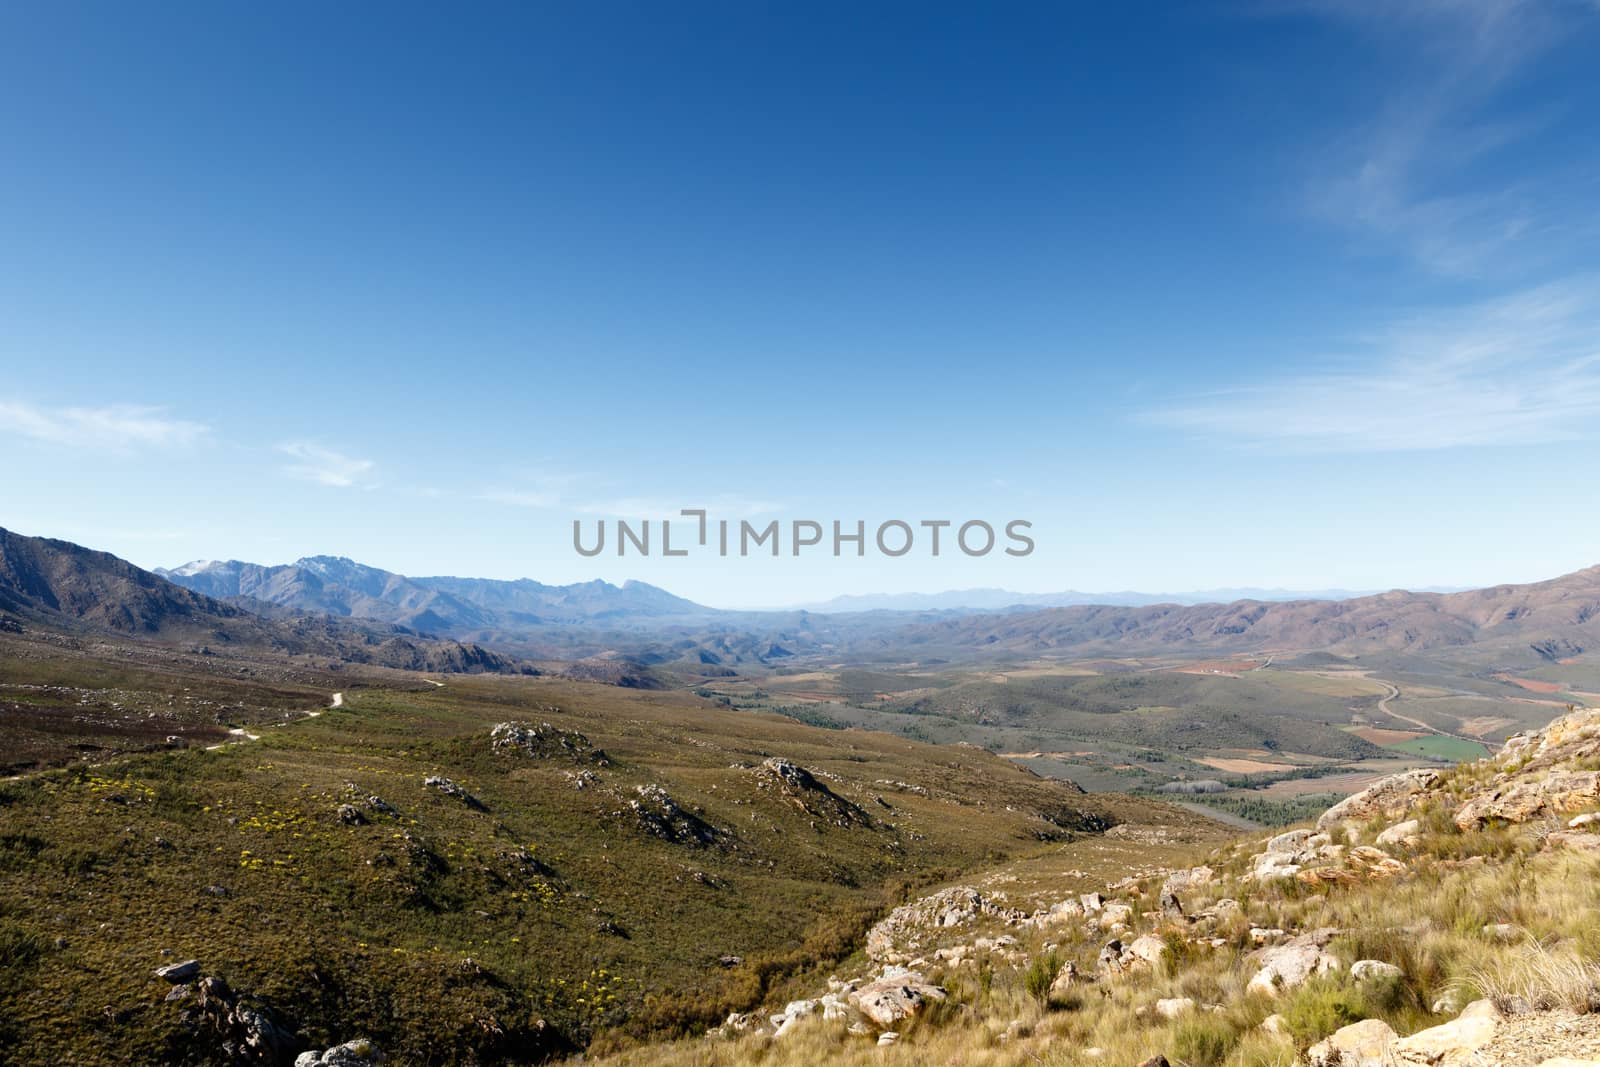 Heading Up - The Swartberg mountains are a mountain range in the Western Cape province of South Africa. It is composed of two main mountain chains running roughly east-west along the northern edge of the semi-arid Little Karoo.